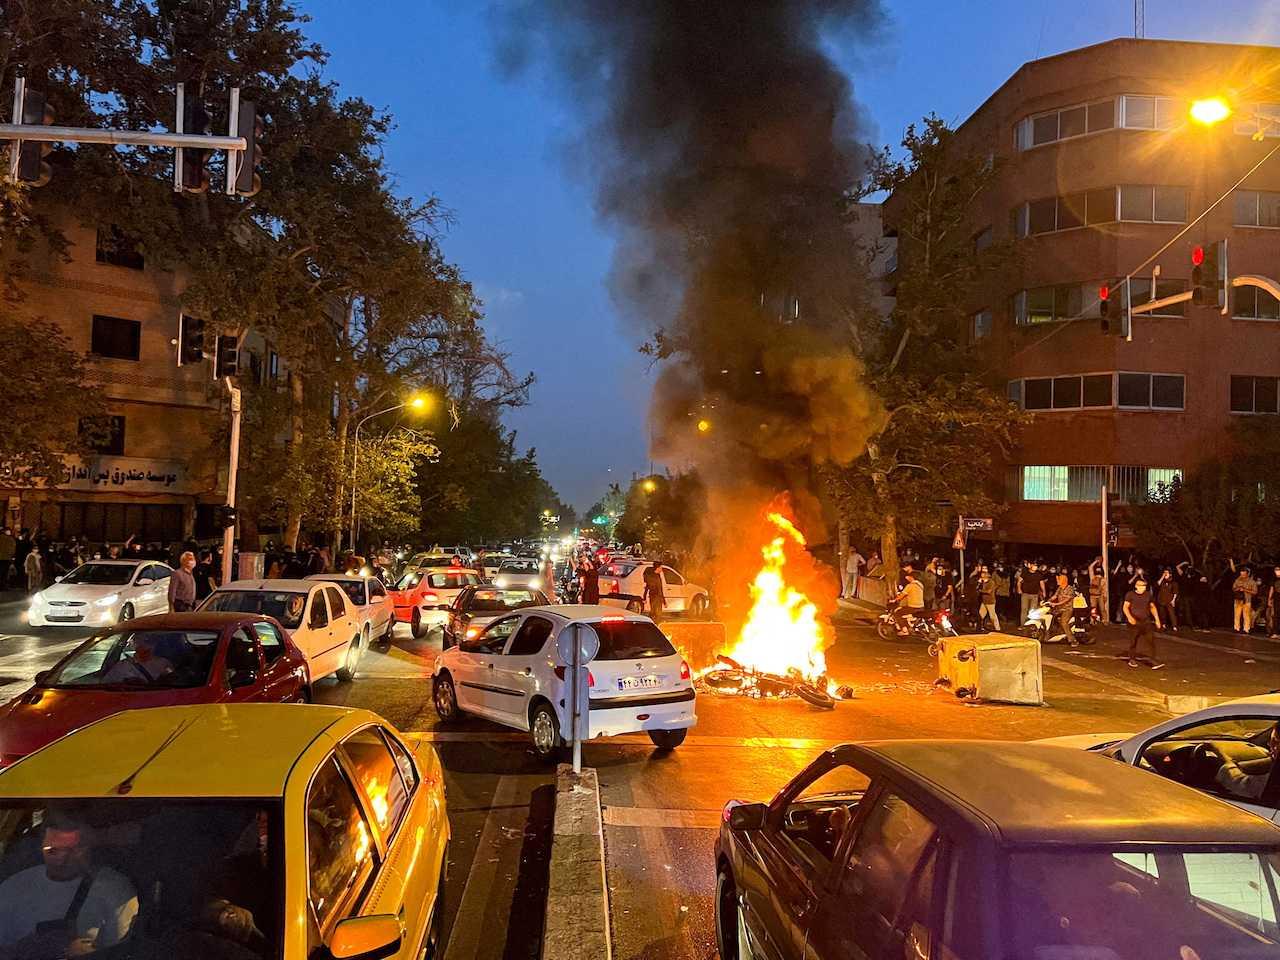 A police motorcycle burns during a protest over the death of Mahsa Amini, a woman who died after being arrested by the Islamic republic's 'morality police', in Tehran, Iran, Sept 19. Photo: Reuters